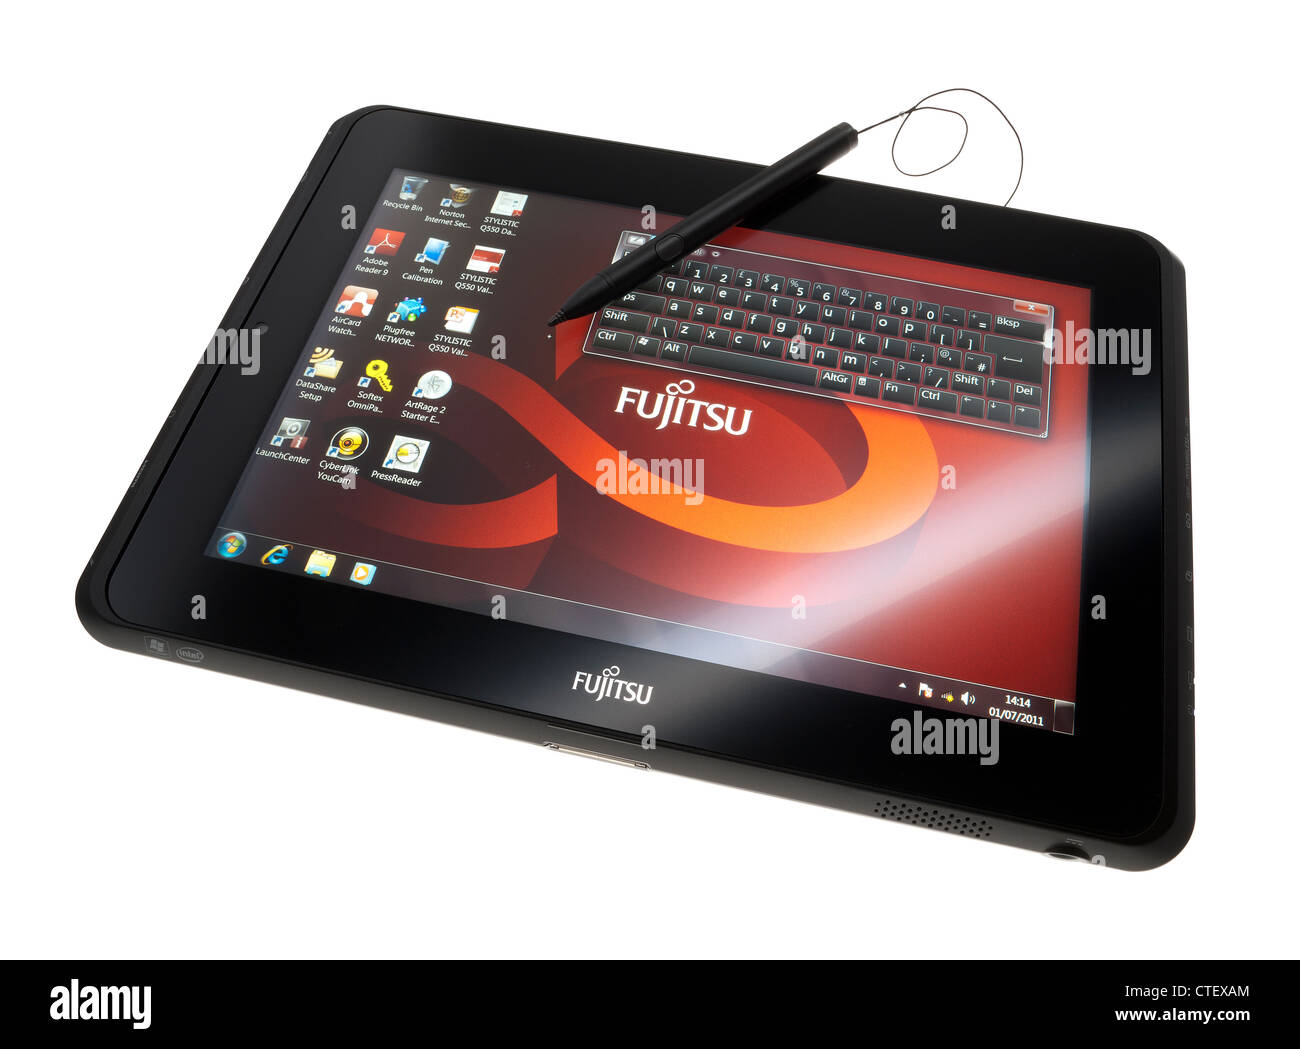 Fujitsu tablet personal computer PC with stylus Stock Photo